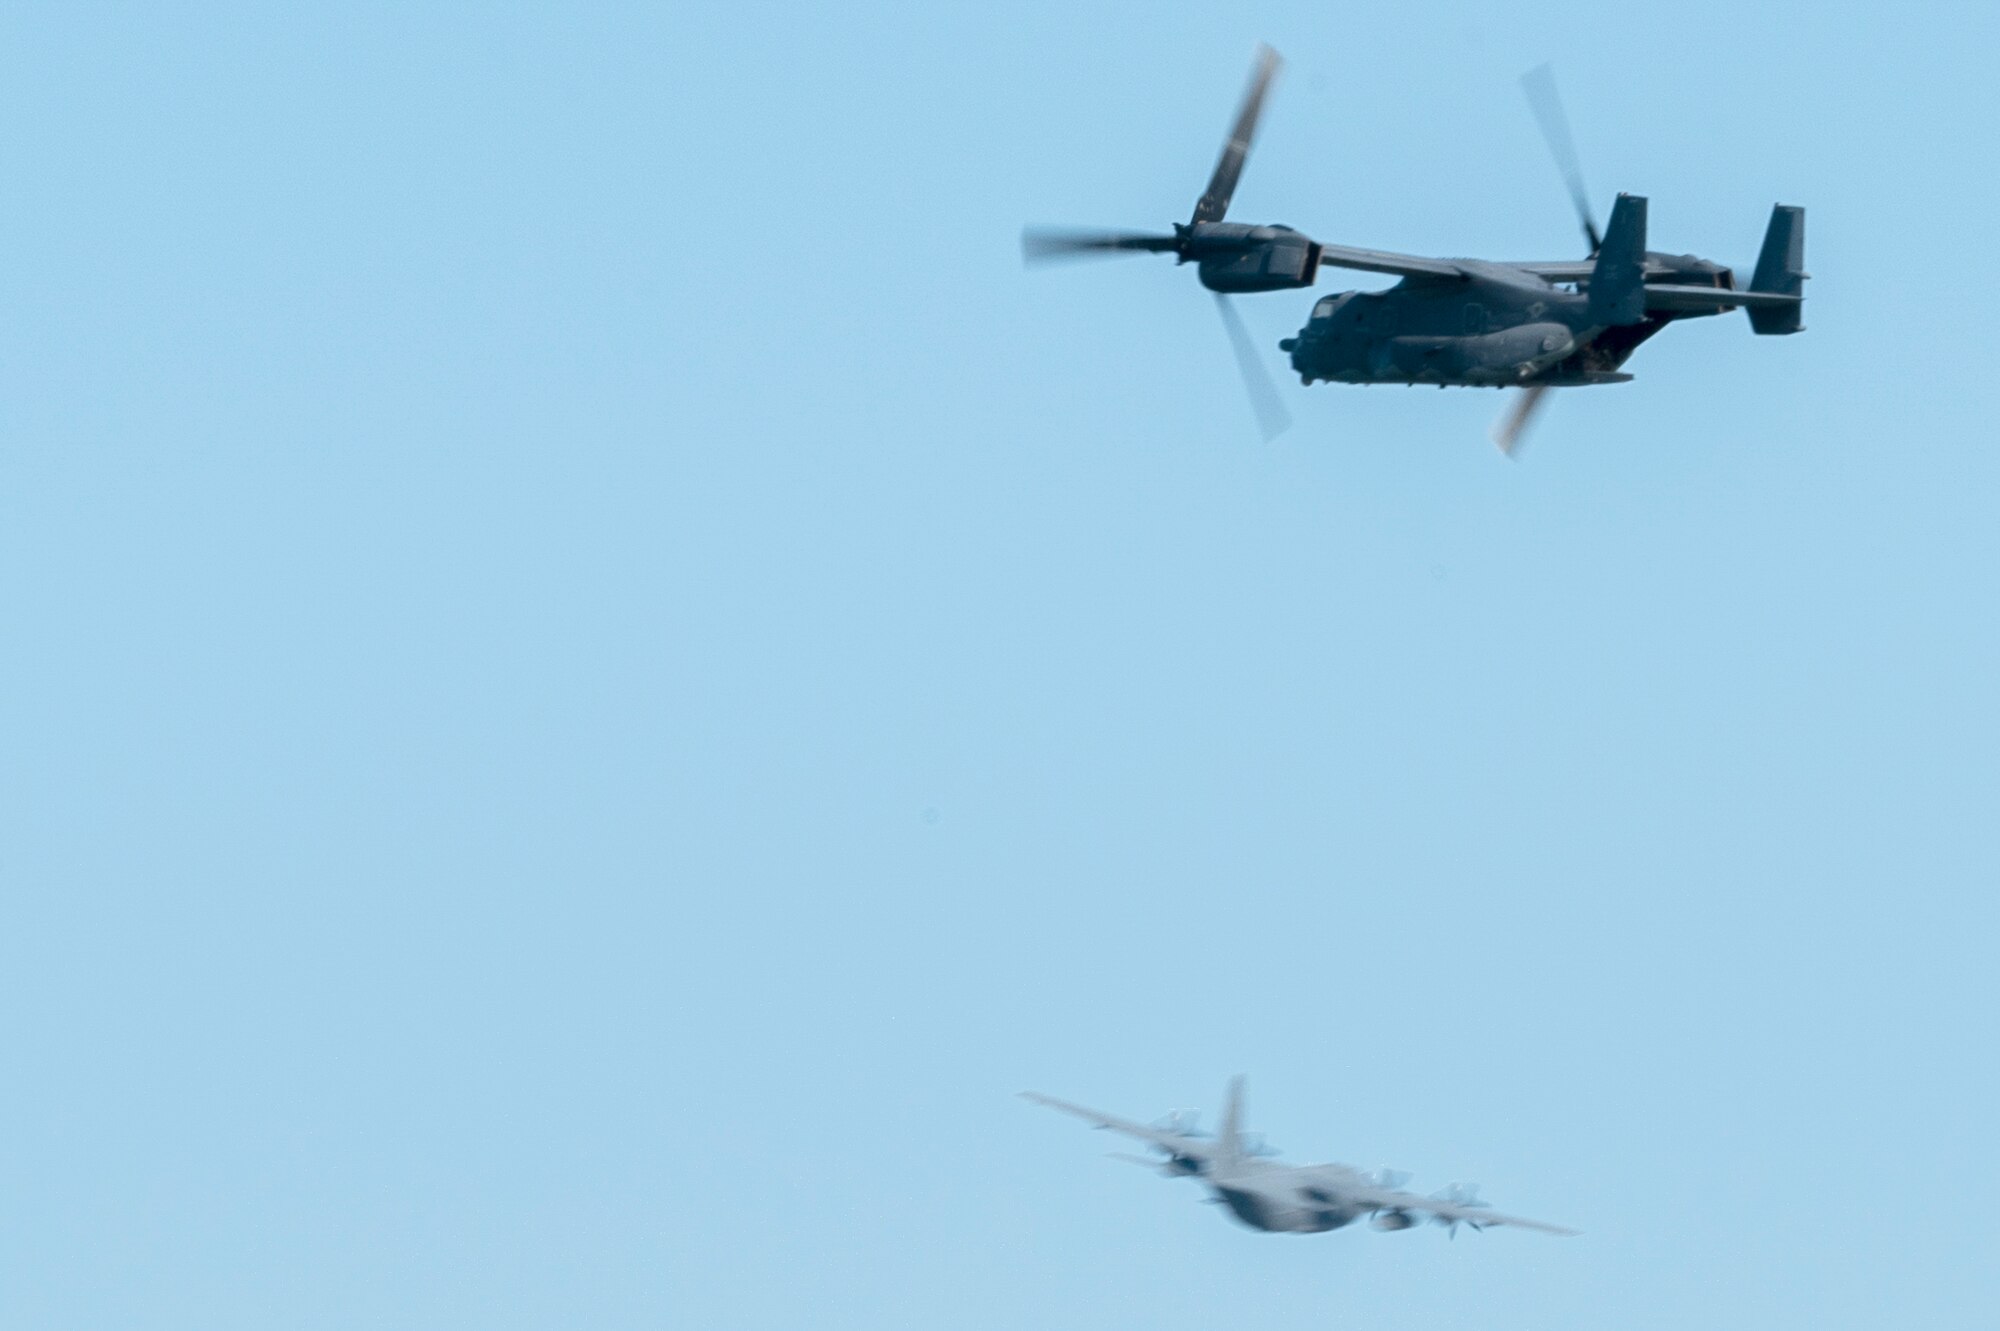 An 8th Special Operations Squadron CV-22 Osprey, assigned to Hurlburt Field, Fla., flies over during The Doolittle Raiders’ 80th Anniversary ceremony, as a 4th Special Operations Squadron AC-130J Ghostrider gunship, also assigned to Hurlburt Field, Fla., flies in the background, April 18, 2022 at Okaloosa Island. More than 14 aircraft including the B-25 medium bombers, which participated in the Doolittle Raid, conducted an aerial review over Okaloosa Island, Florida following a formal ceremony honoring participants of the air operation.